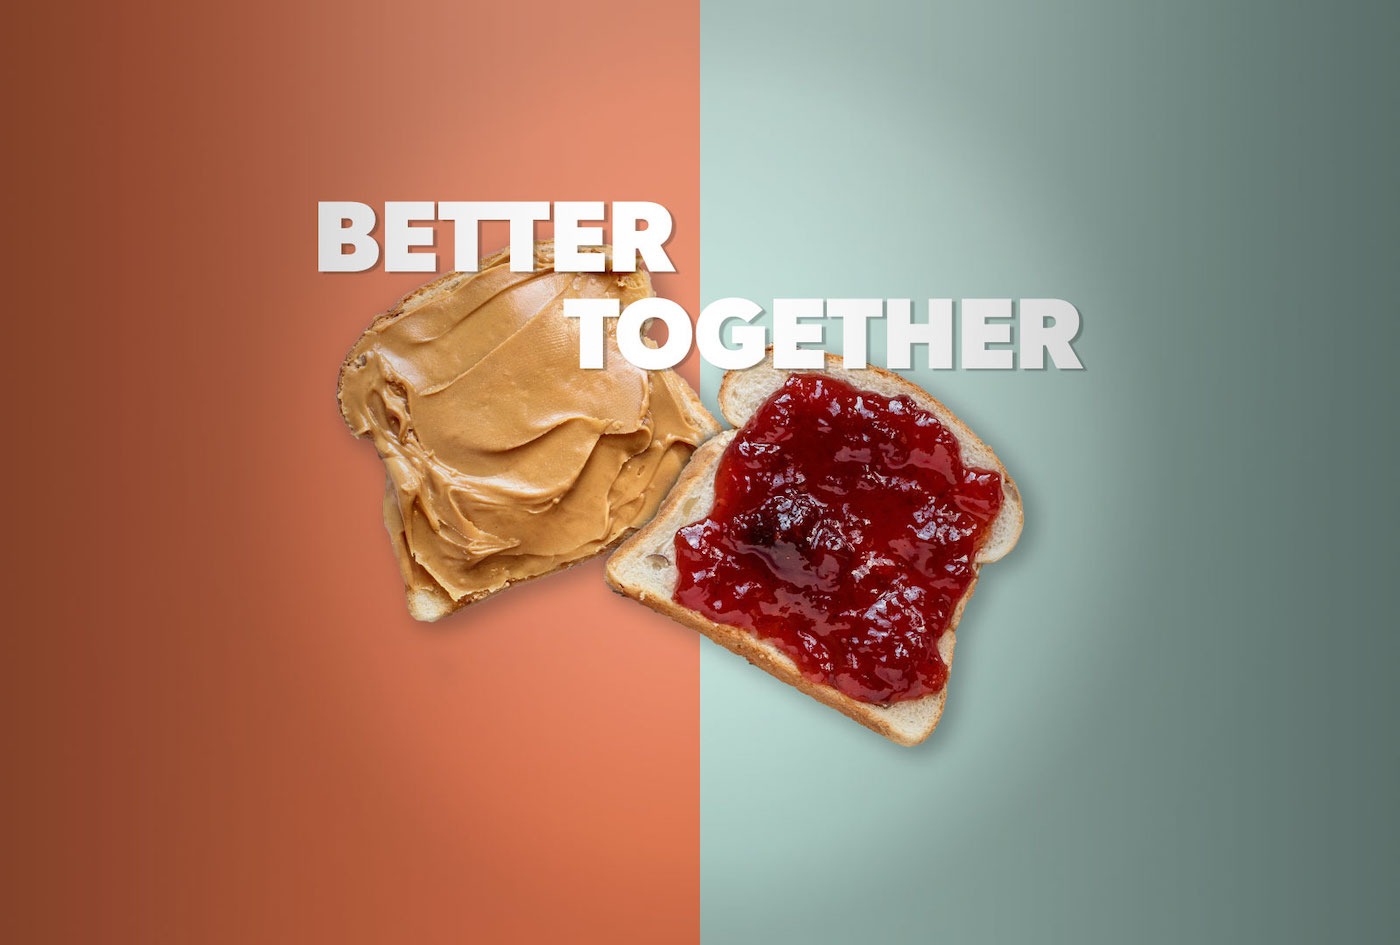 Two slices of bread, one with peanut butter and another with jelly, with the words Better Together overlaying them